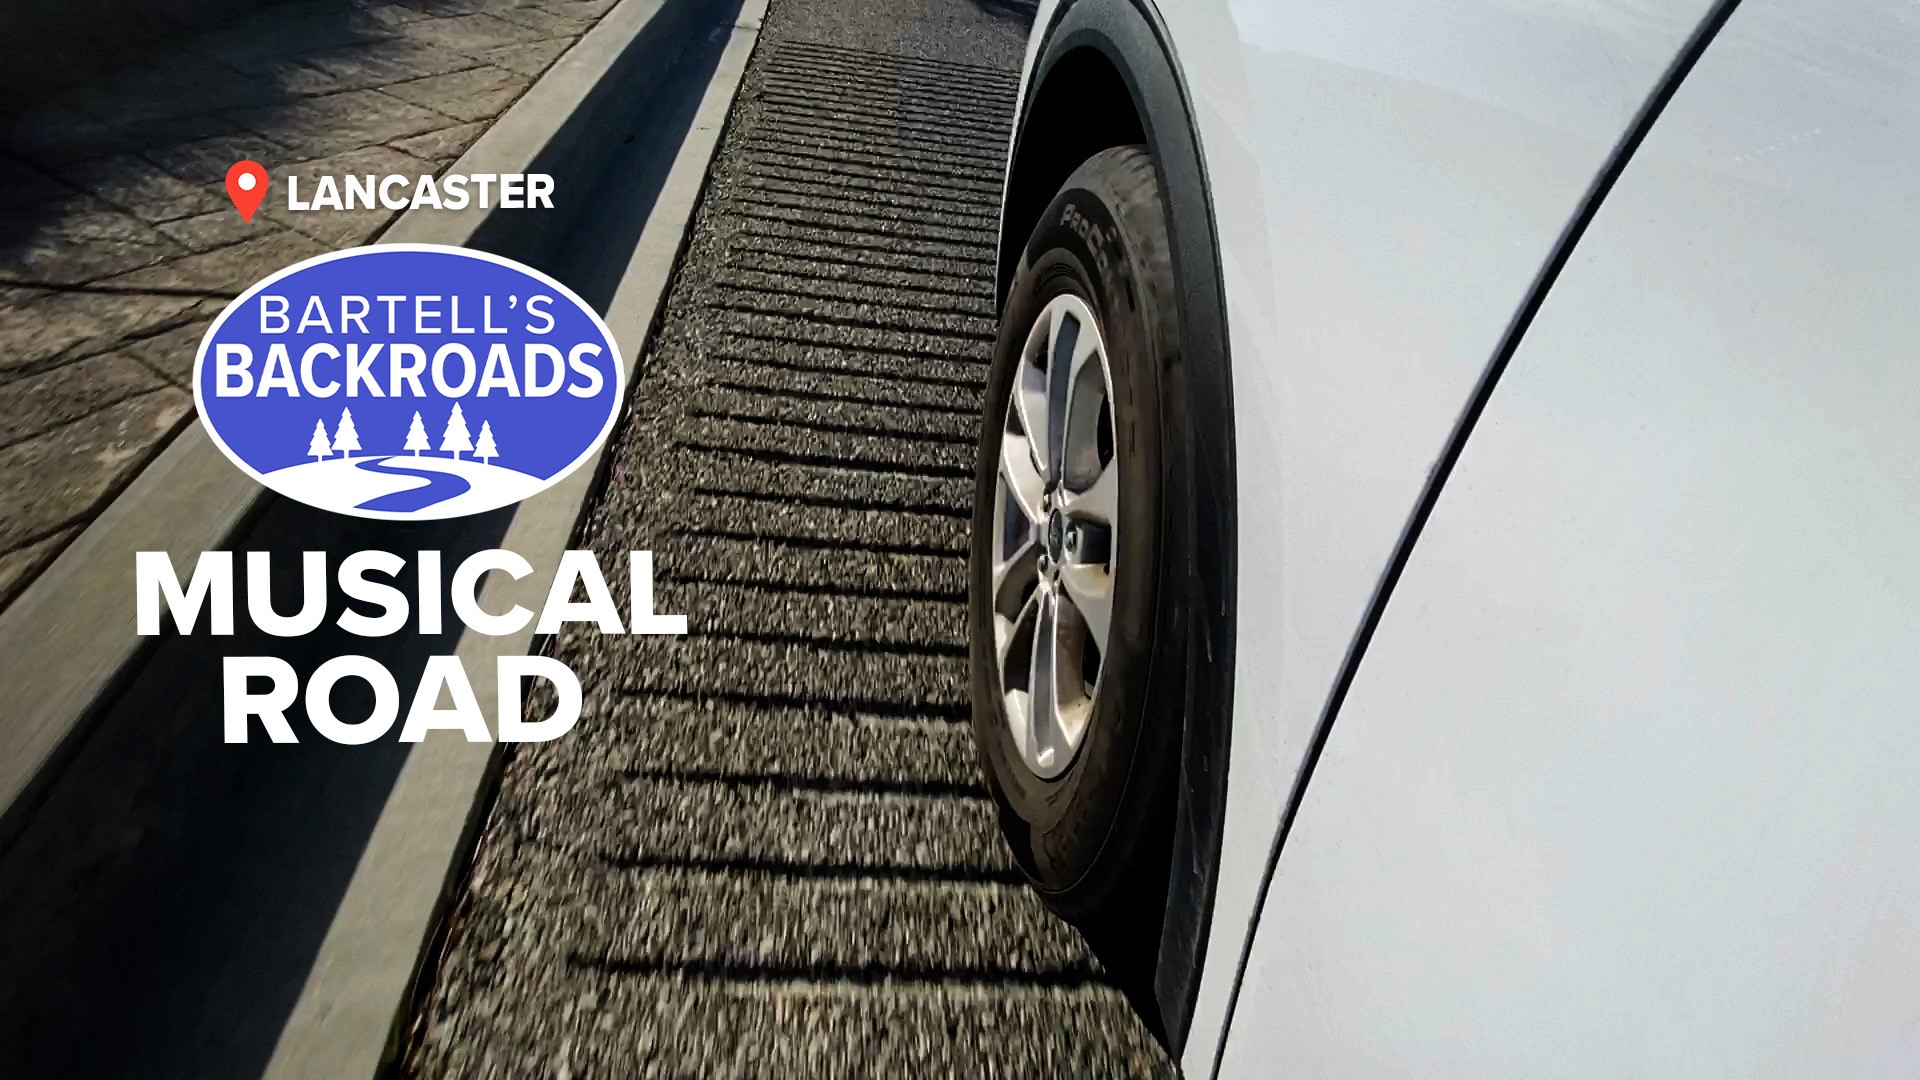 Your tires play the tunes on this road, which was originally built for a car commercial.